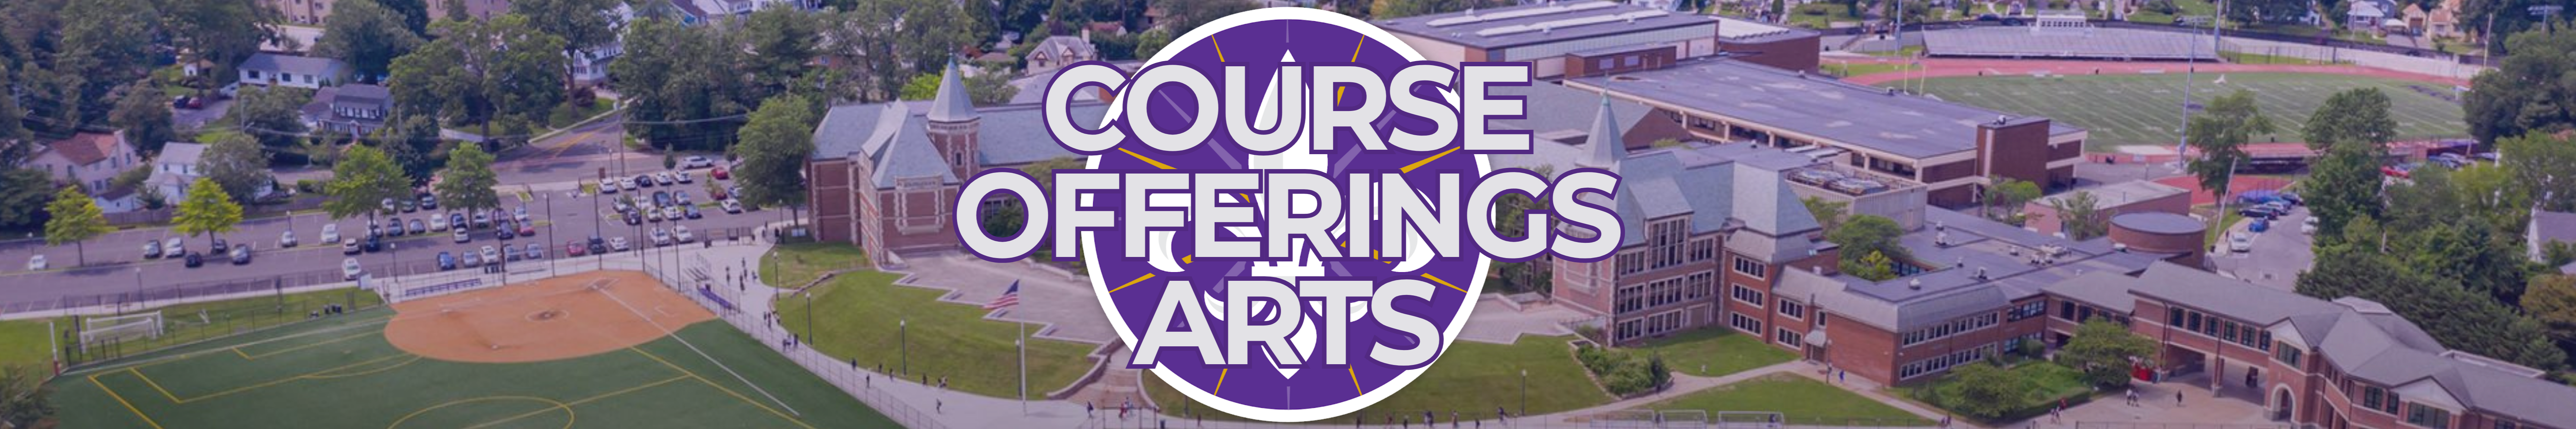 course offerings arts banner